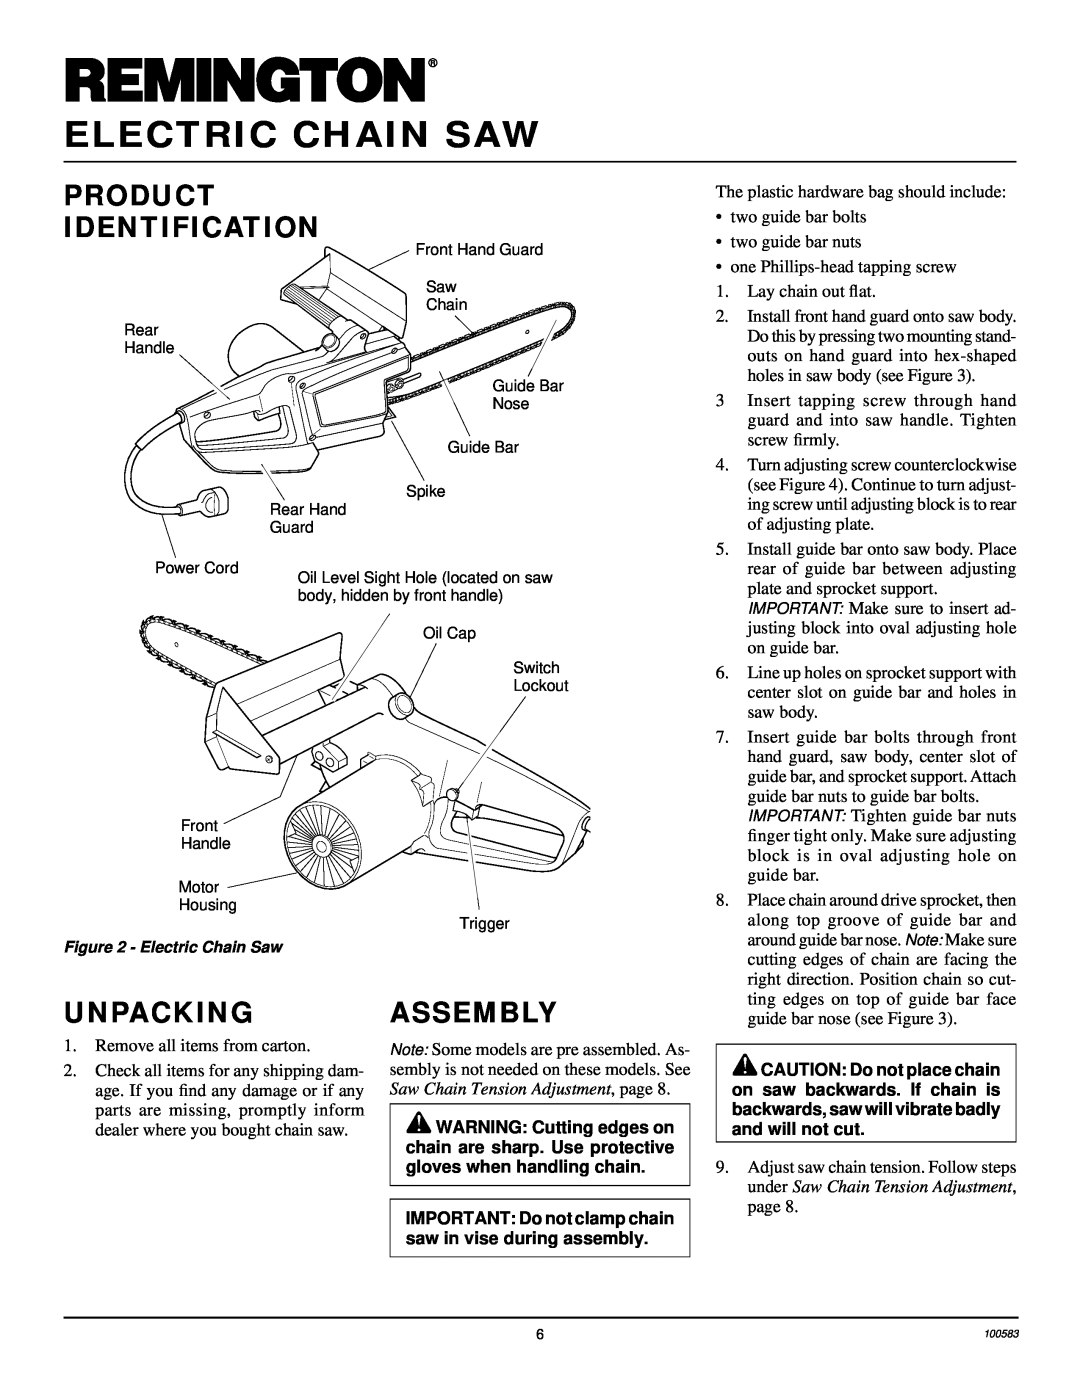 Remington LNT-2 10-inch, LNT-2 8-inch, EL-7 14-inch Product Identification, Unpacking, Assembly, Electric Chain Saw 